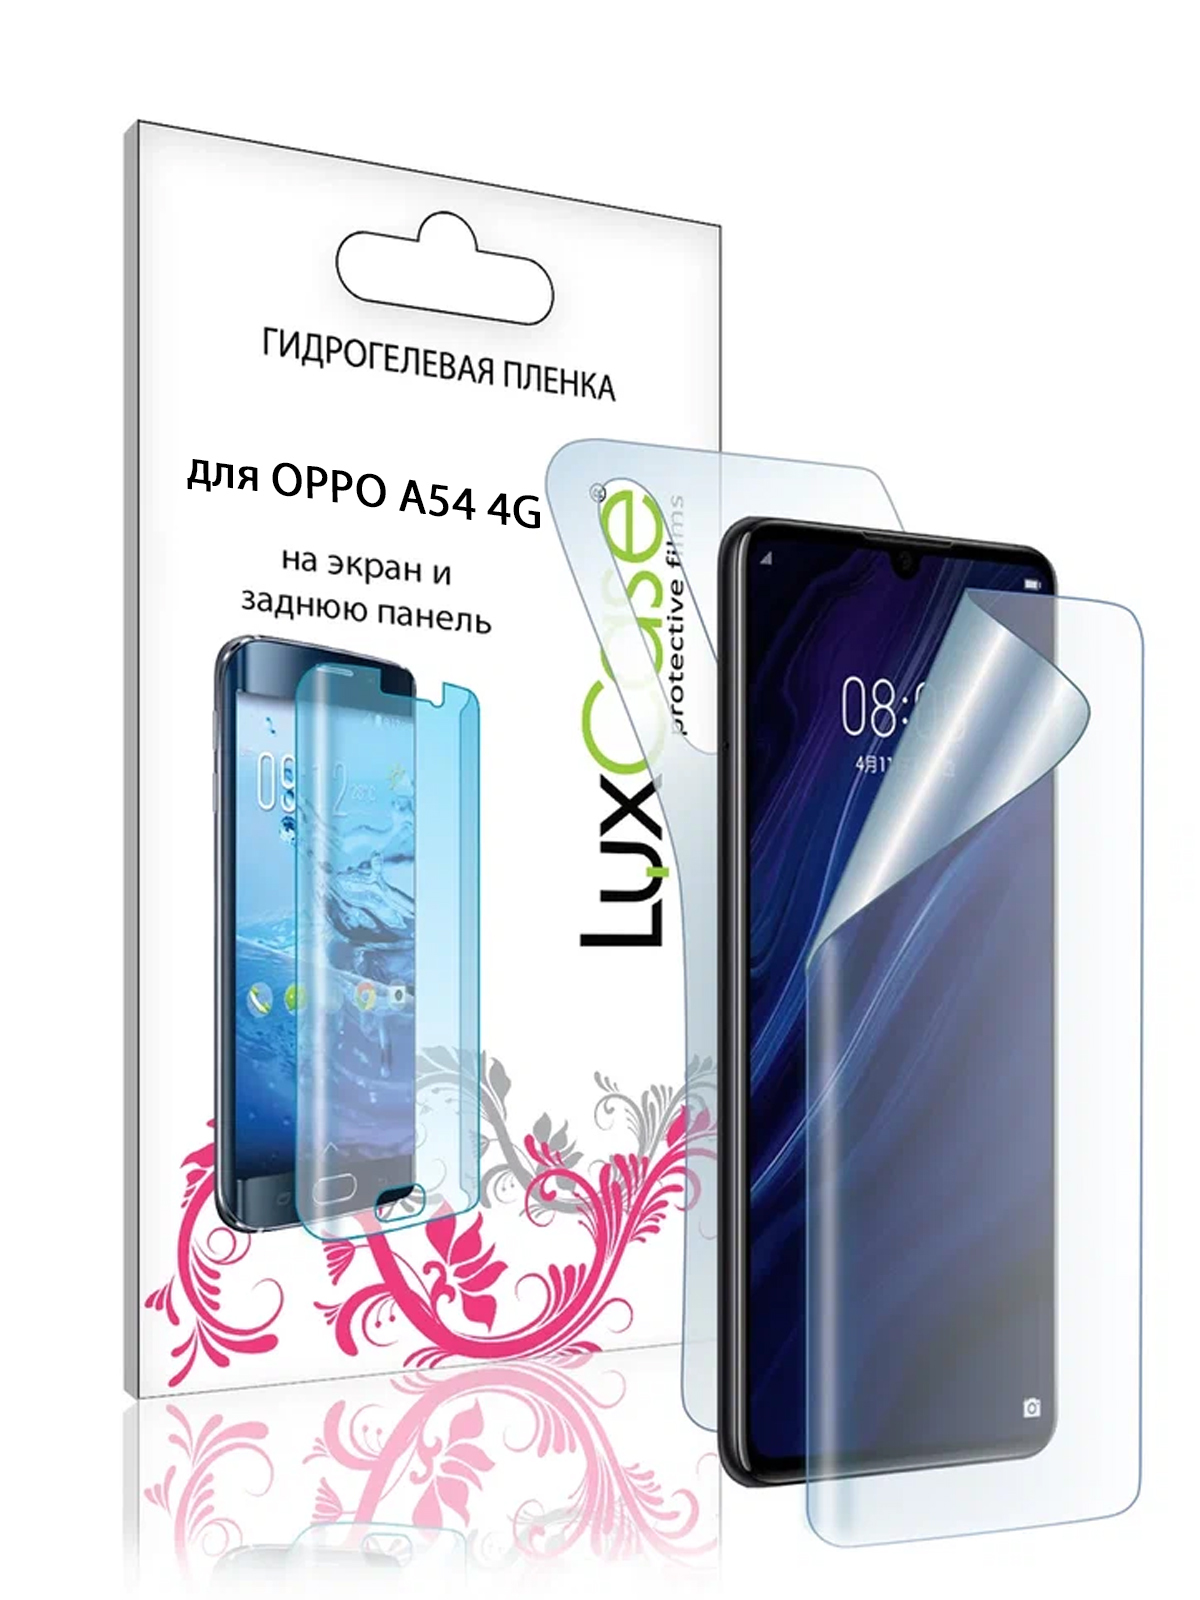 Пленка гидрогелевая LuxCase для Oppo A54 Front and Back Transparent 86397 гидрогелевая пленка luxcase для oppo a12 0 14mm front and back transparent 86974